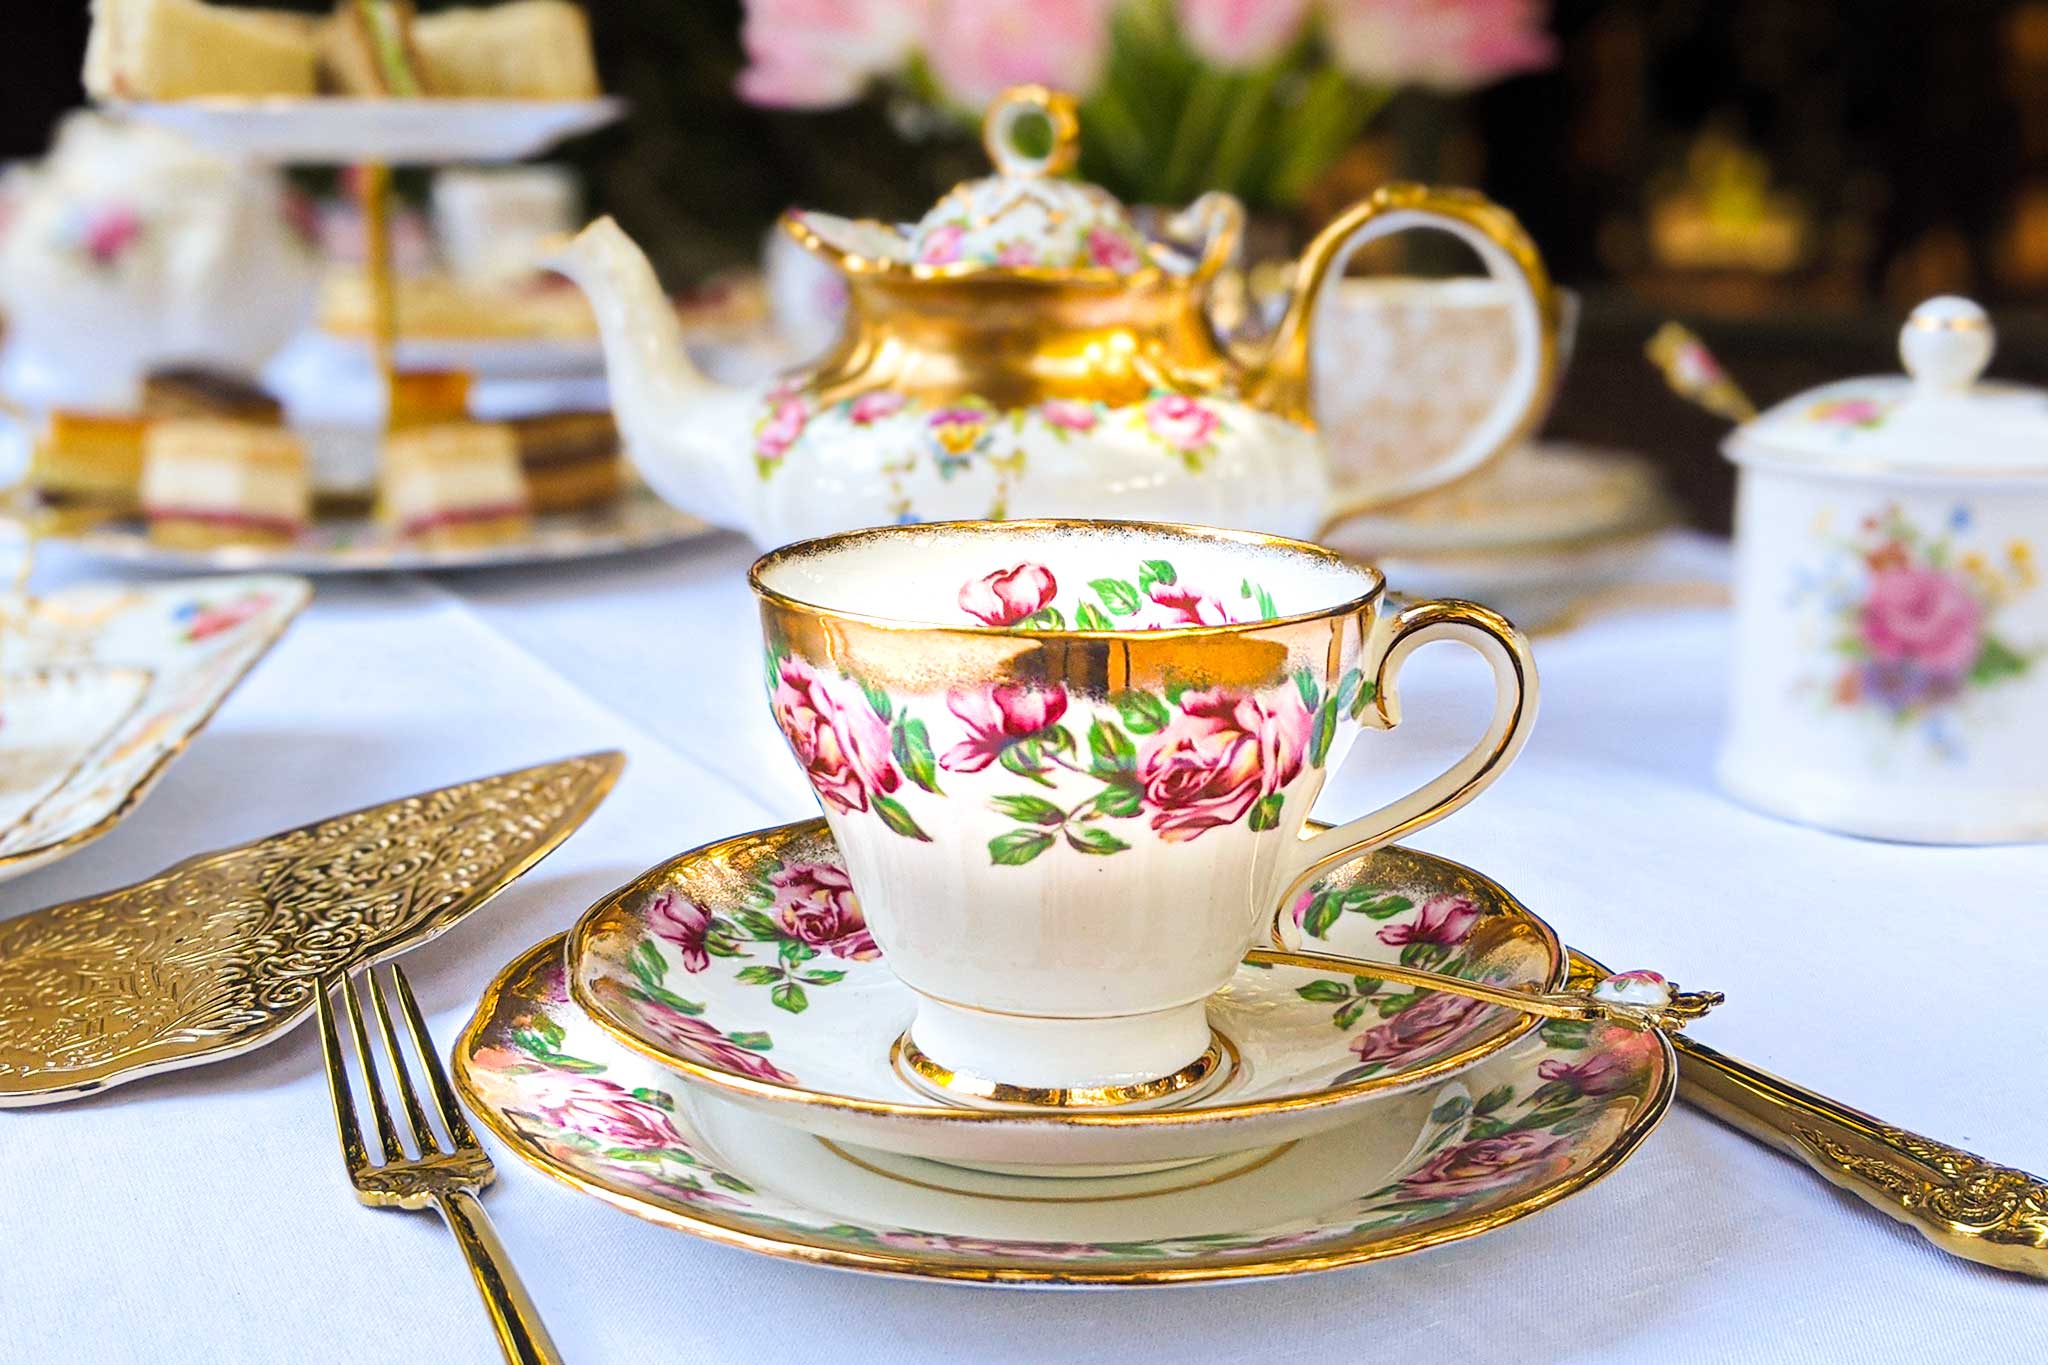 Experience a real English Afternoon Tea